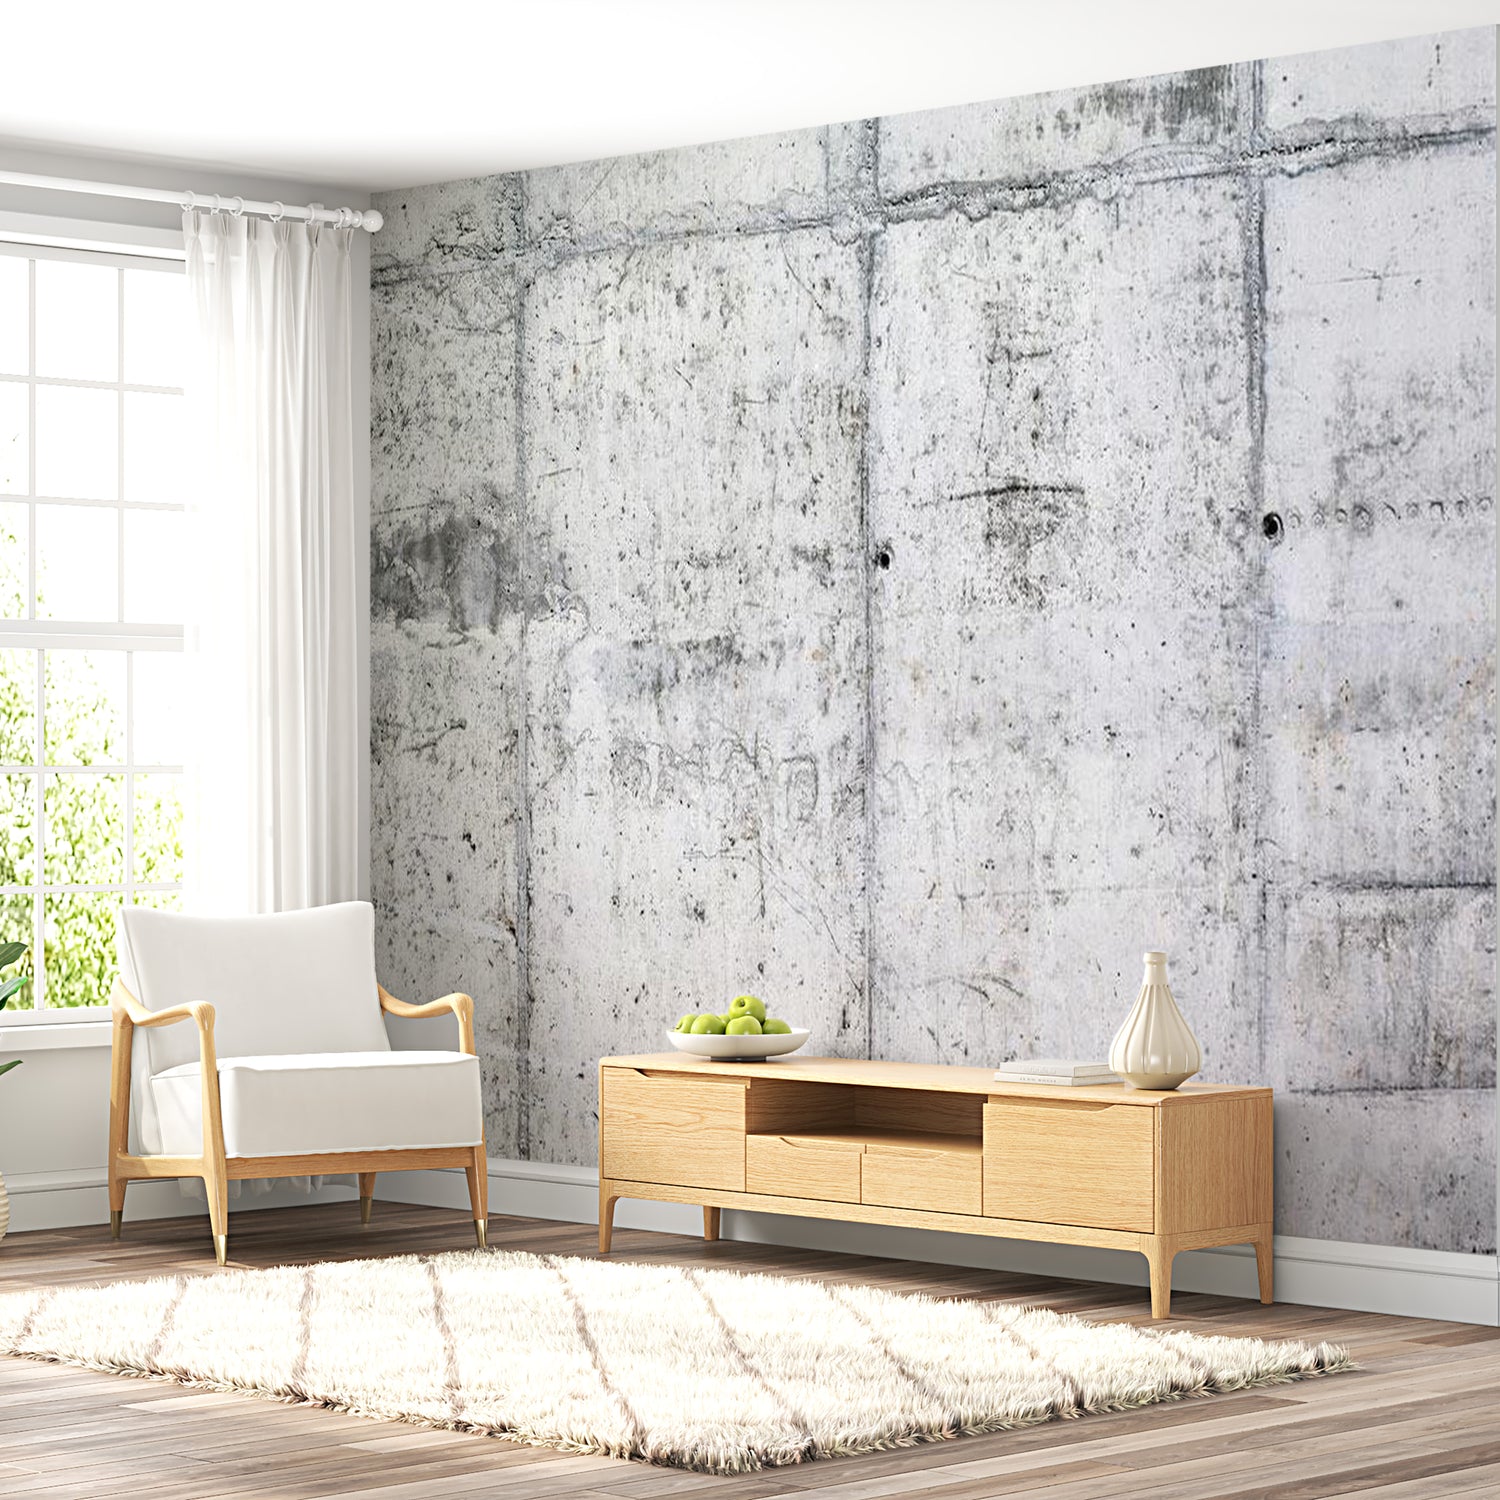 Peel & Stick Wall Mural - Concrete Wall - Removable Wall Decals